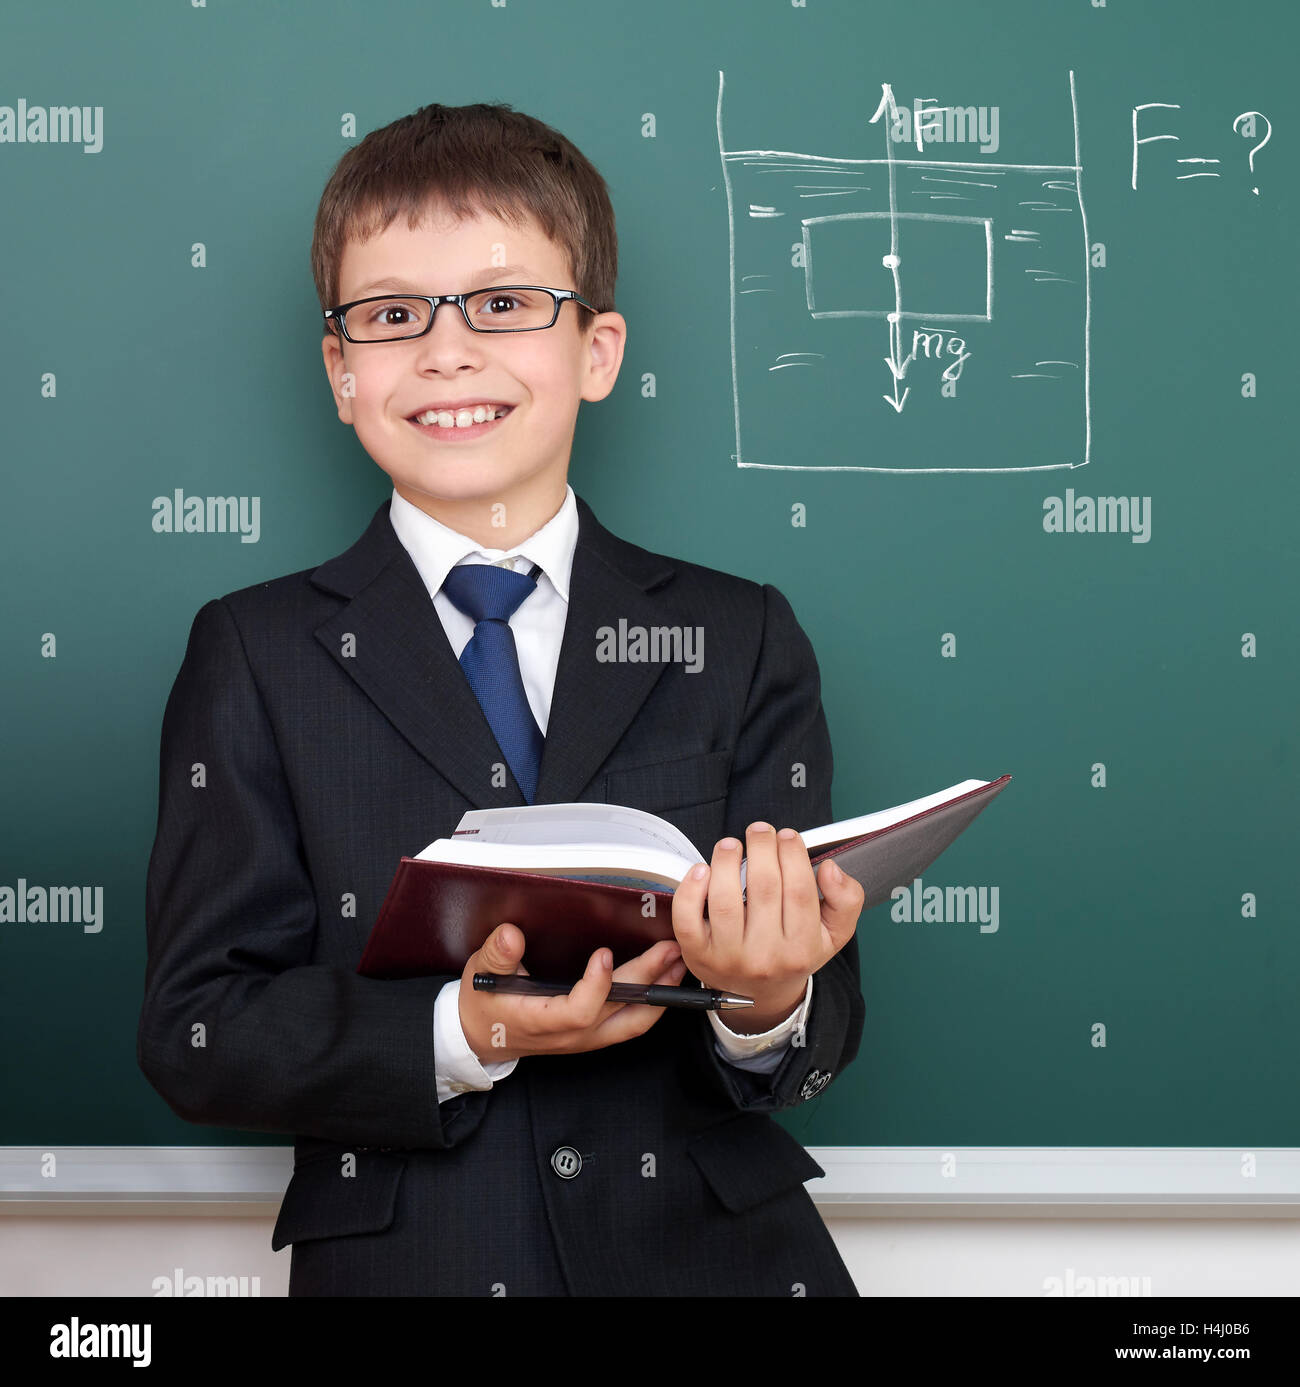 school boy with book, archimedes principle drawing on chalkboard background, dressed in classic black suit, education concept Stock Photo